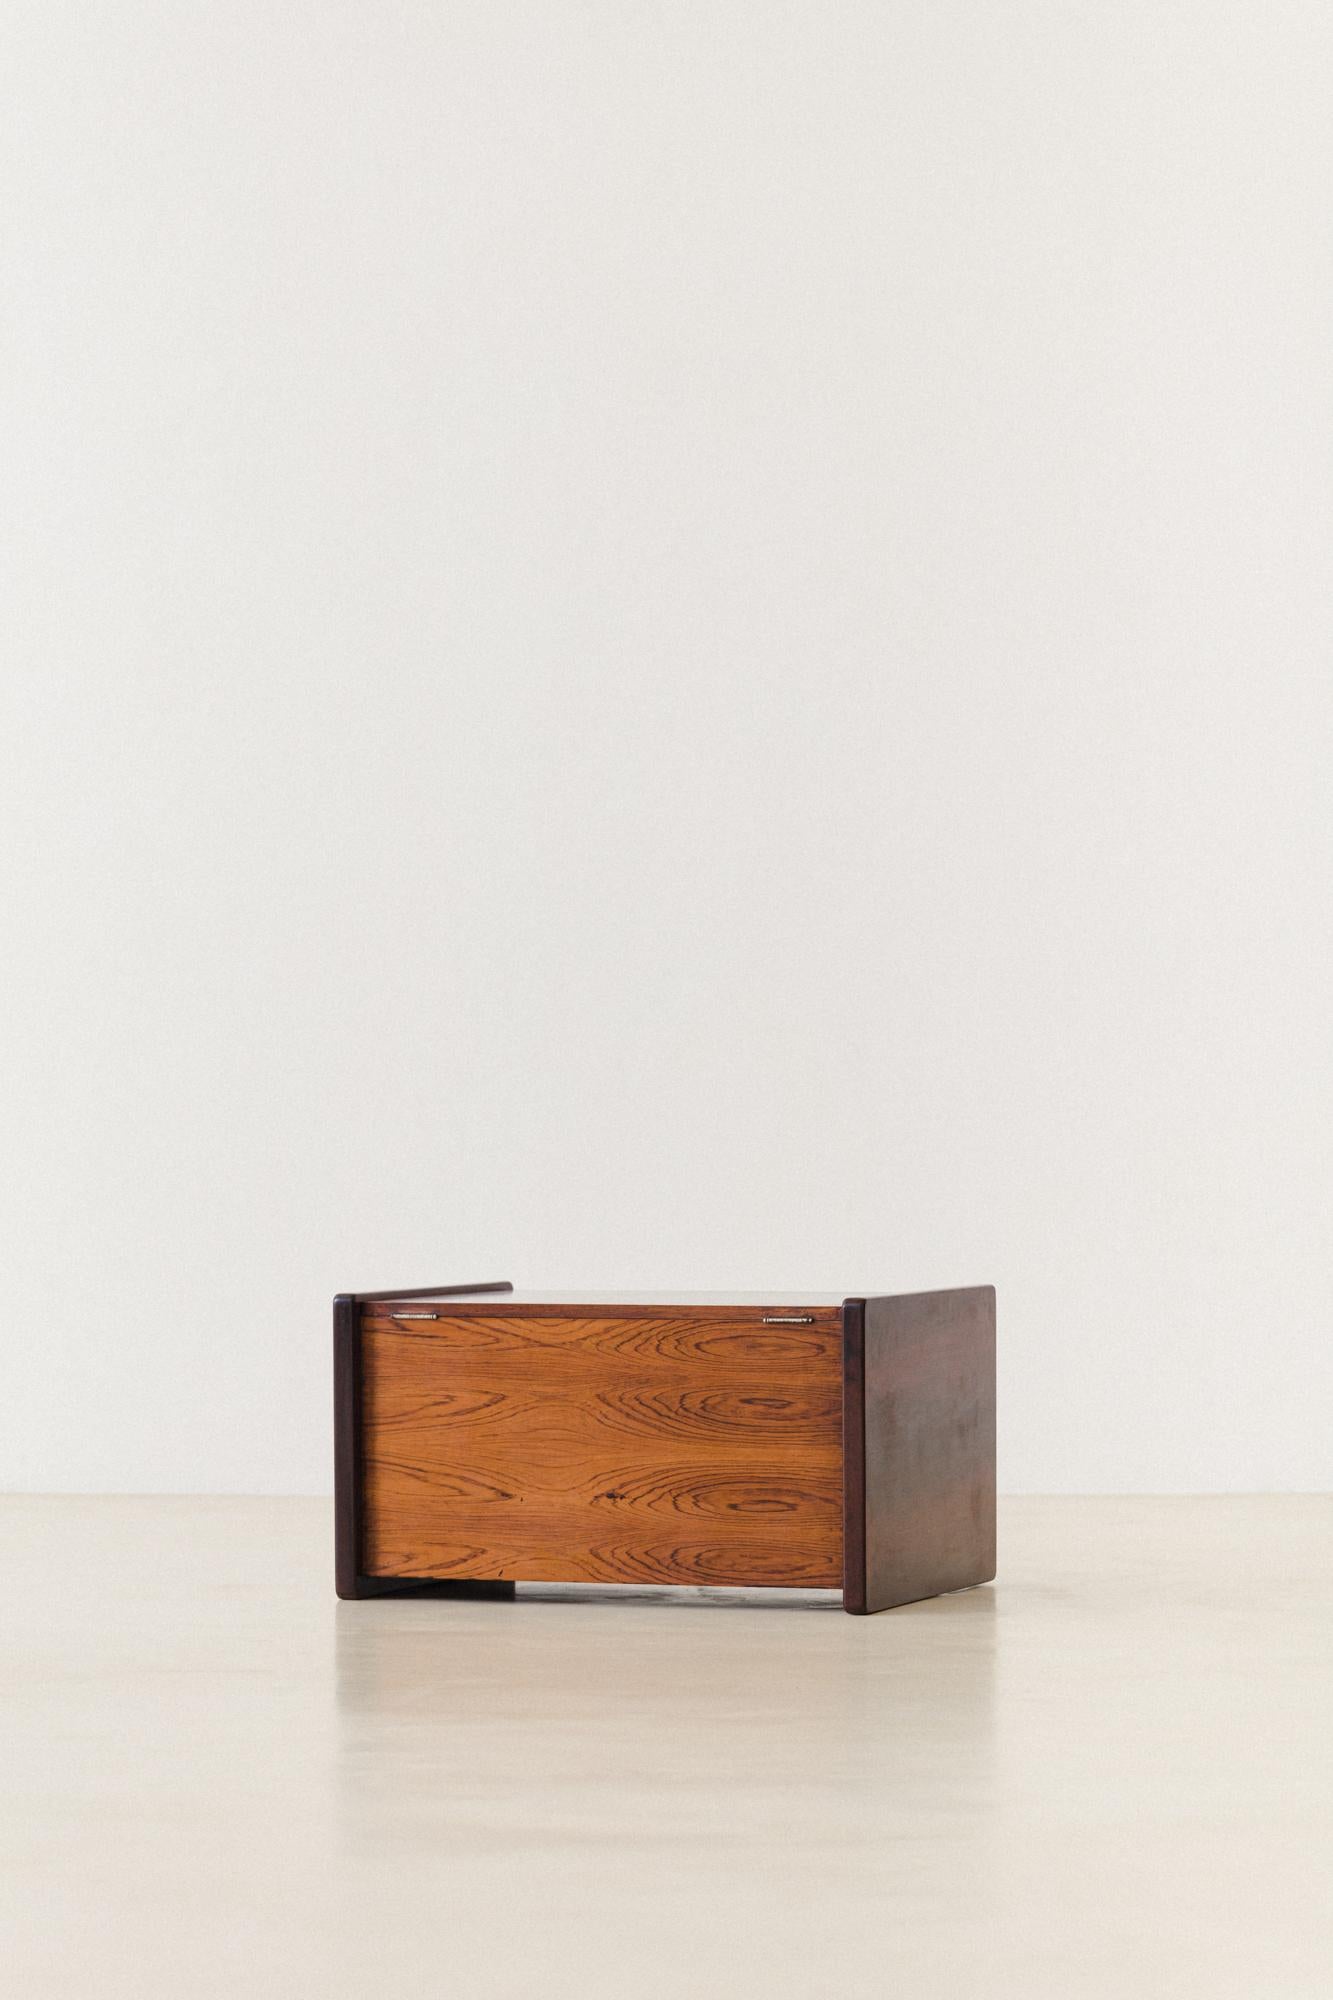 Rosewood Storage Chest by Celina Decoracoes, 1960s, Midcentury Brazilian Design For Sale 2